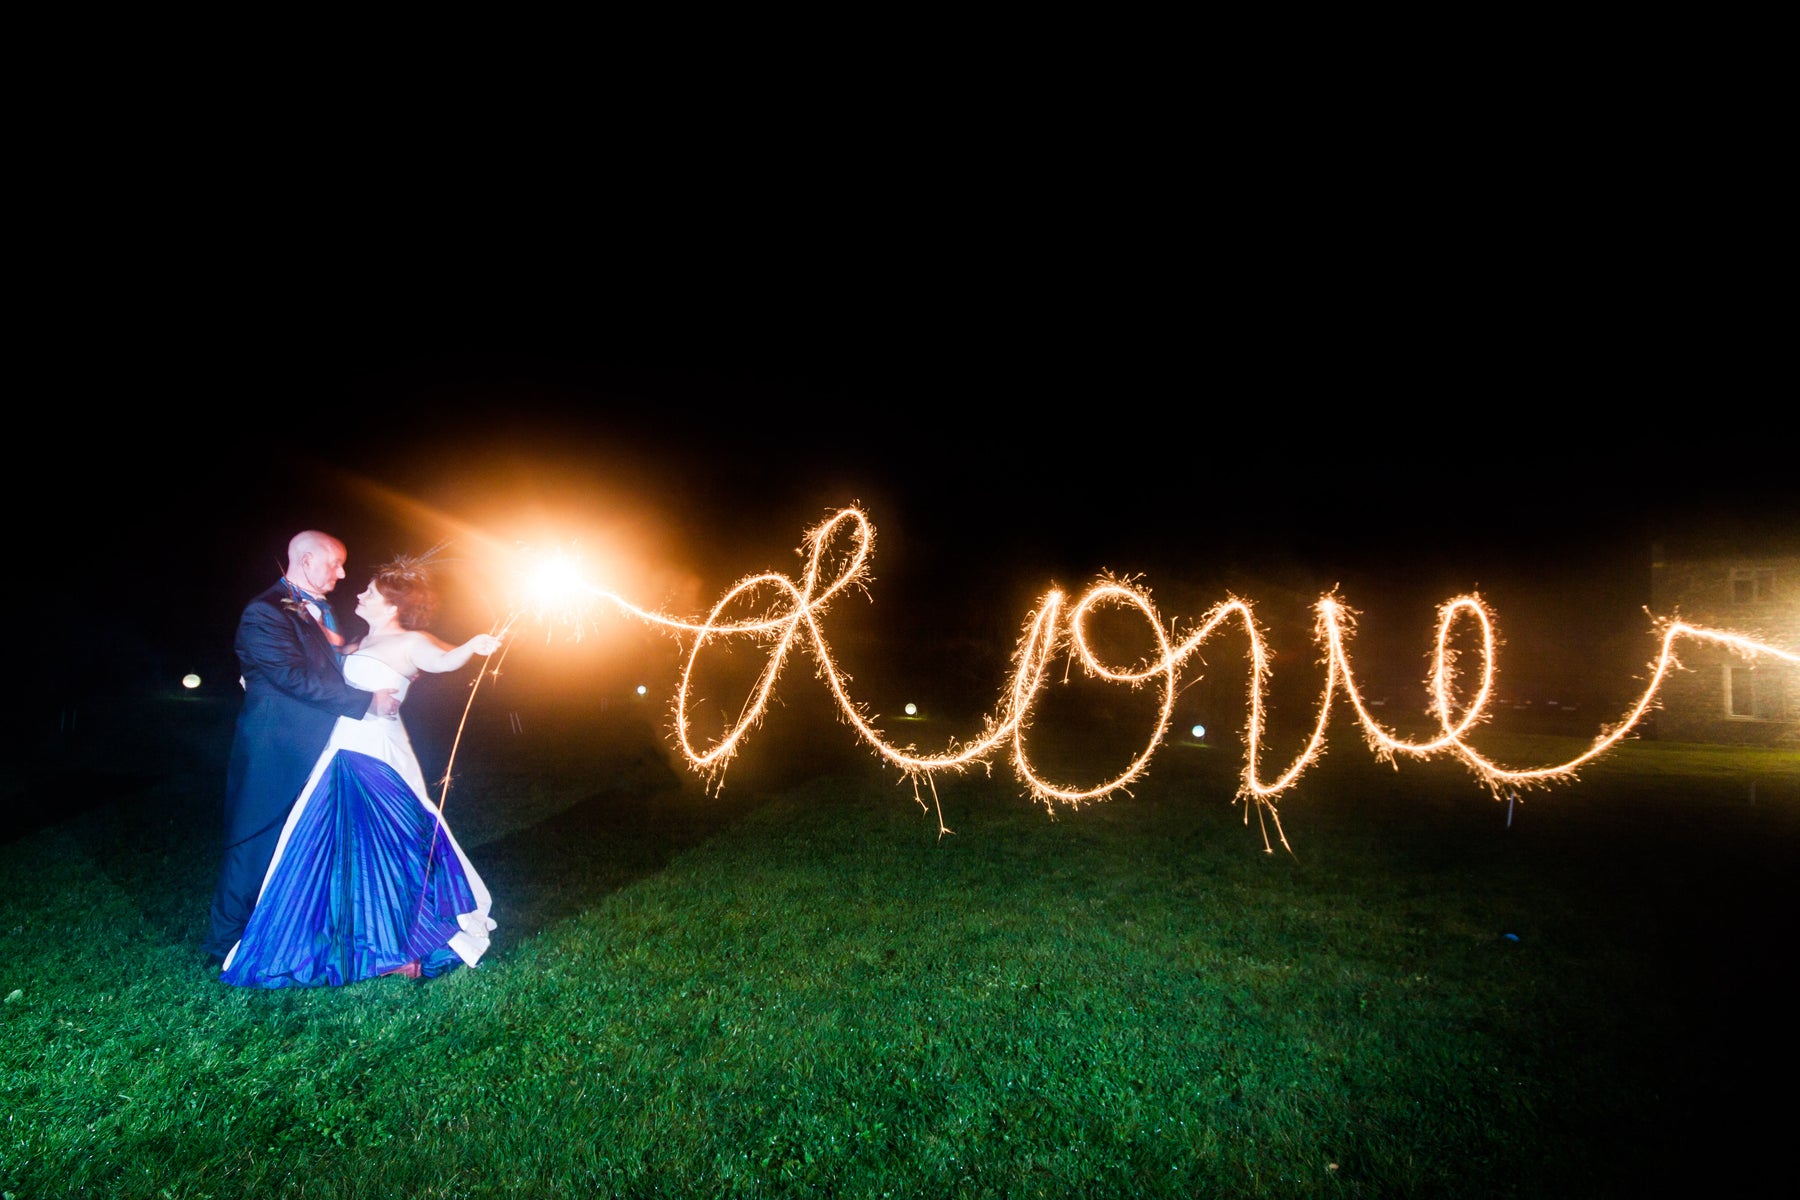 Wedding Fireworks - Add colour to your special day